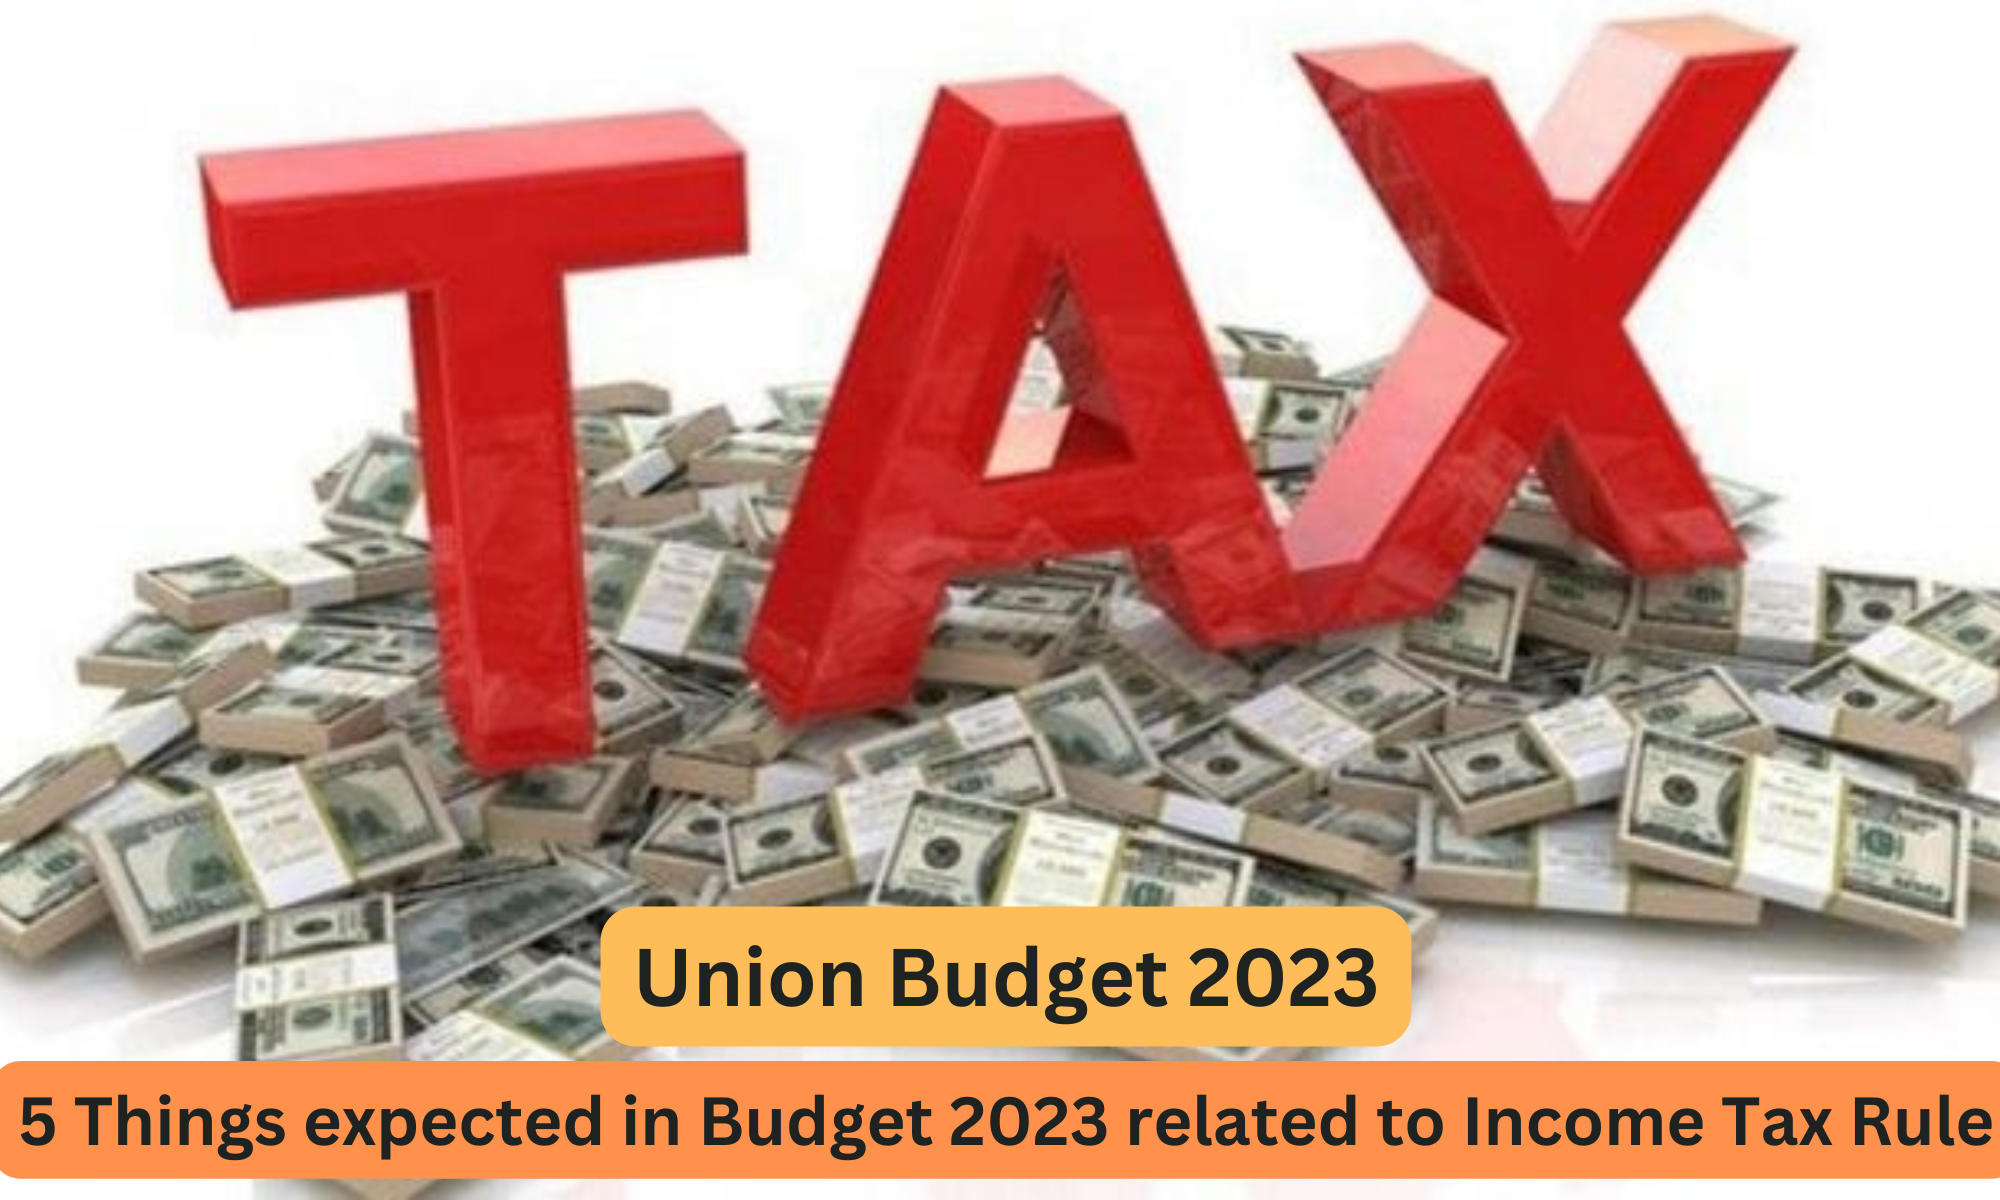 5 Things expected in Budget 2023 related to Income Tax Rule